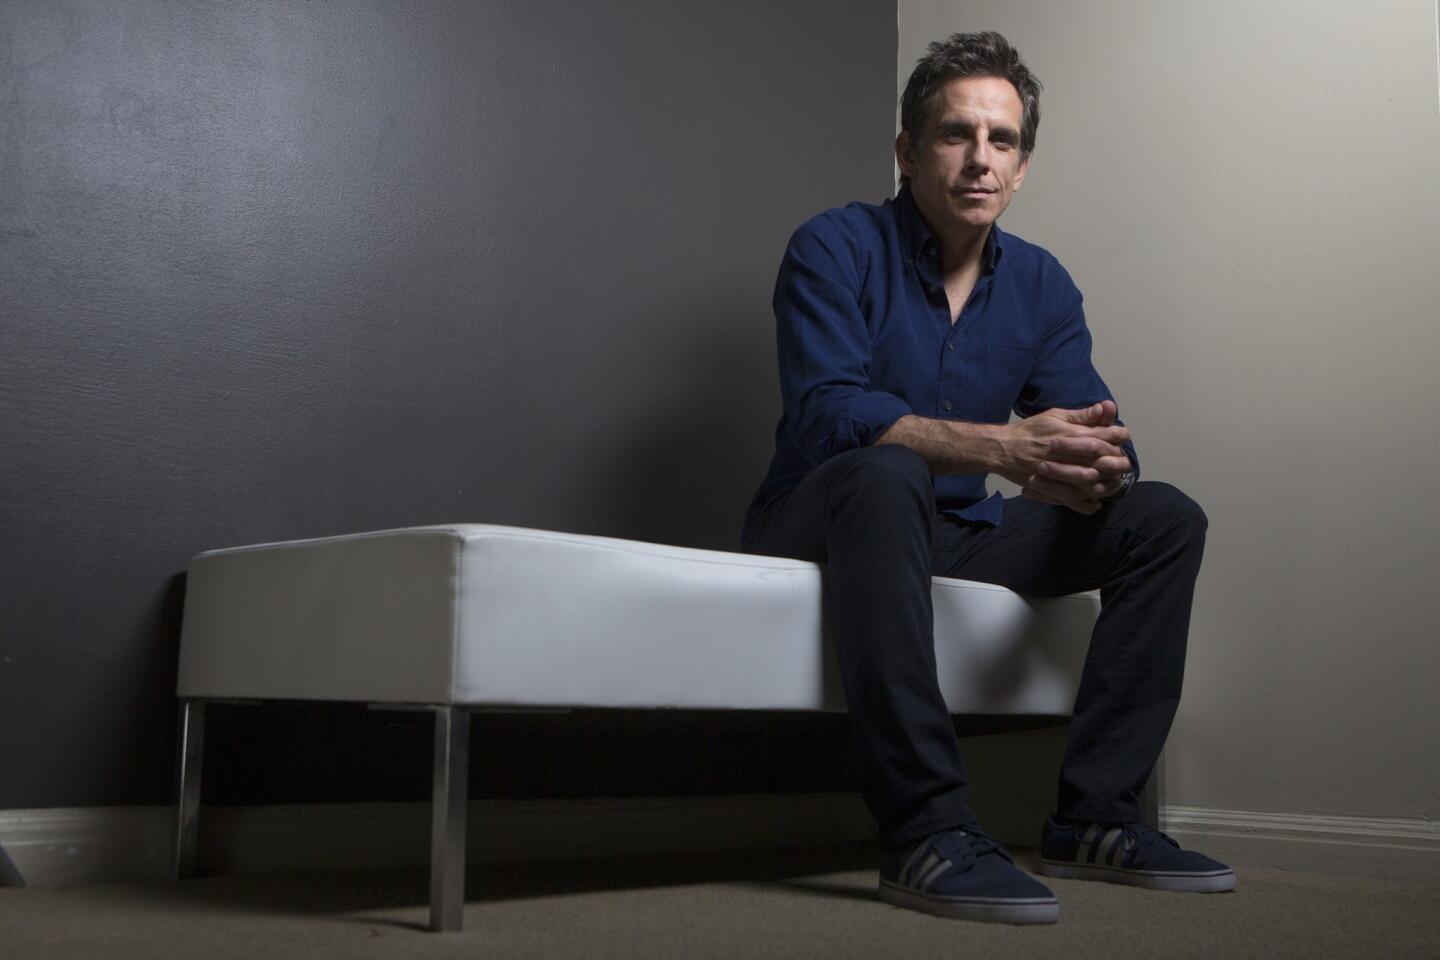 Ben Stiller was born and bred into comedy. His parents were buzzed-about comedians Jerry Stiller and Anne Meara, and they weren't shy about introducing the world of entertainment to their son. At a young age, Stiller and his sister Amy would dress up in her tights to perform Shakespeare renditions at home. As Stiller grew older, he turned to the stage and studied the craft at UCLA School of Theater, Film and Television. He had always been a fan of Tom Cruise. Obsessed, even. At the time, he spoofed Cruise's role in sports drama "The Color of Money" (1986), which garnered the attention of "Saturday Night Live," and ultimately led to Stiller's year-long gig on the show. Since then, the New York native has starred in a legion of comedy features -- romantic, crime and sports-driven. Here we recap a portion of Stiller's onscreen work through the years. By Christy Khoshaba